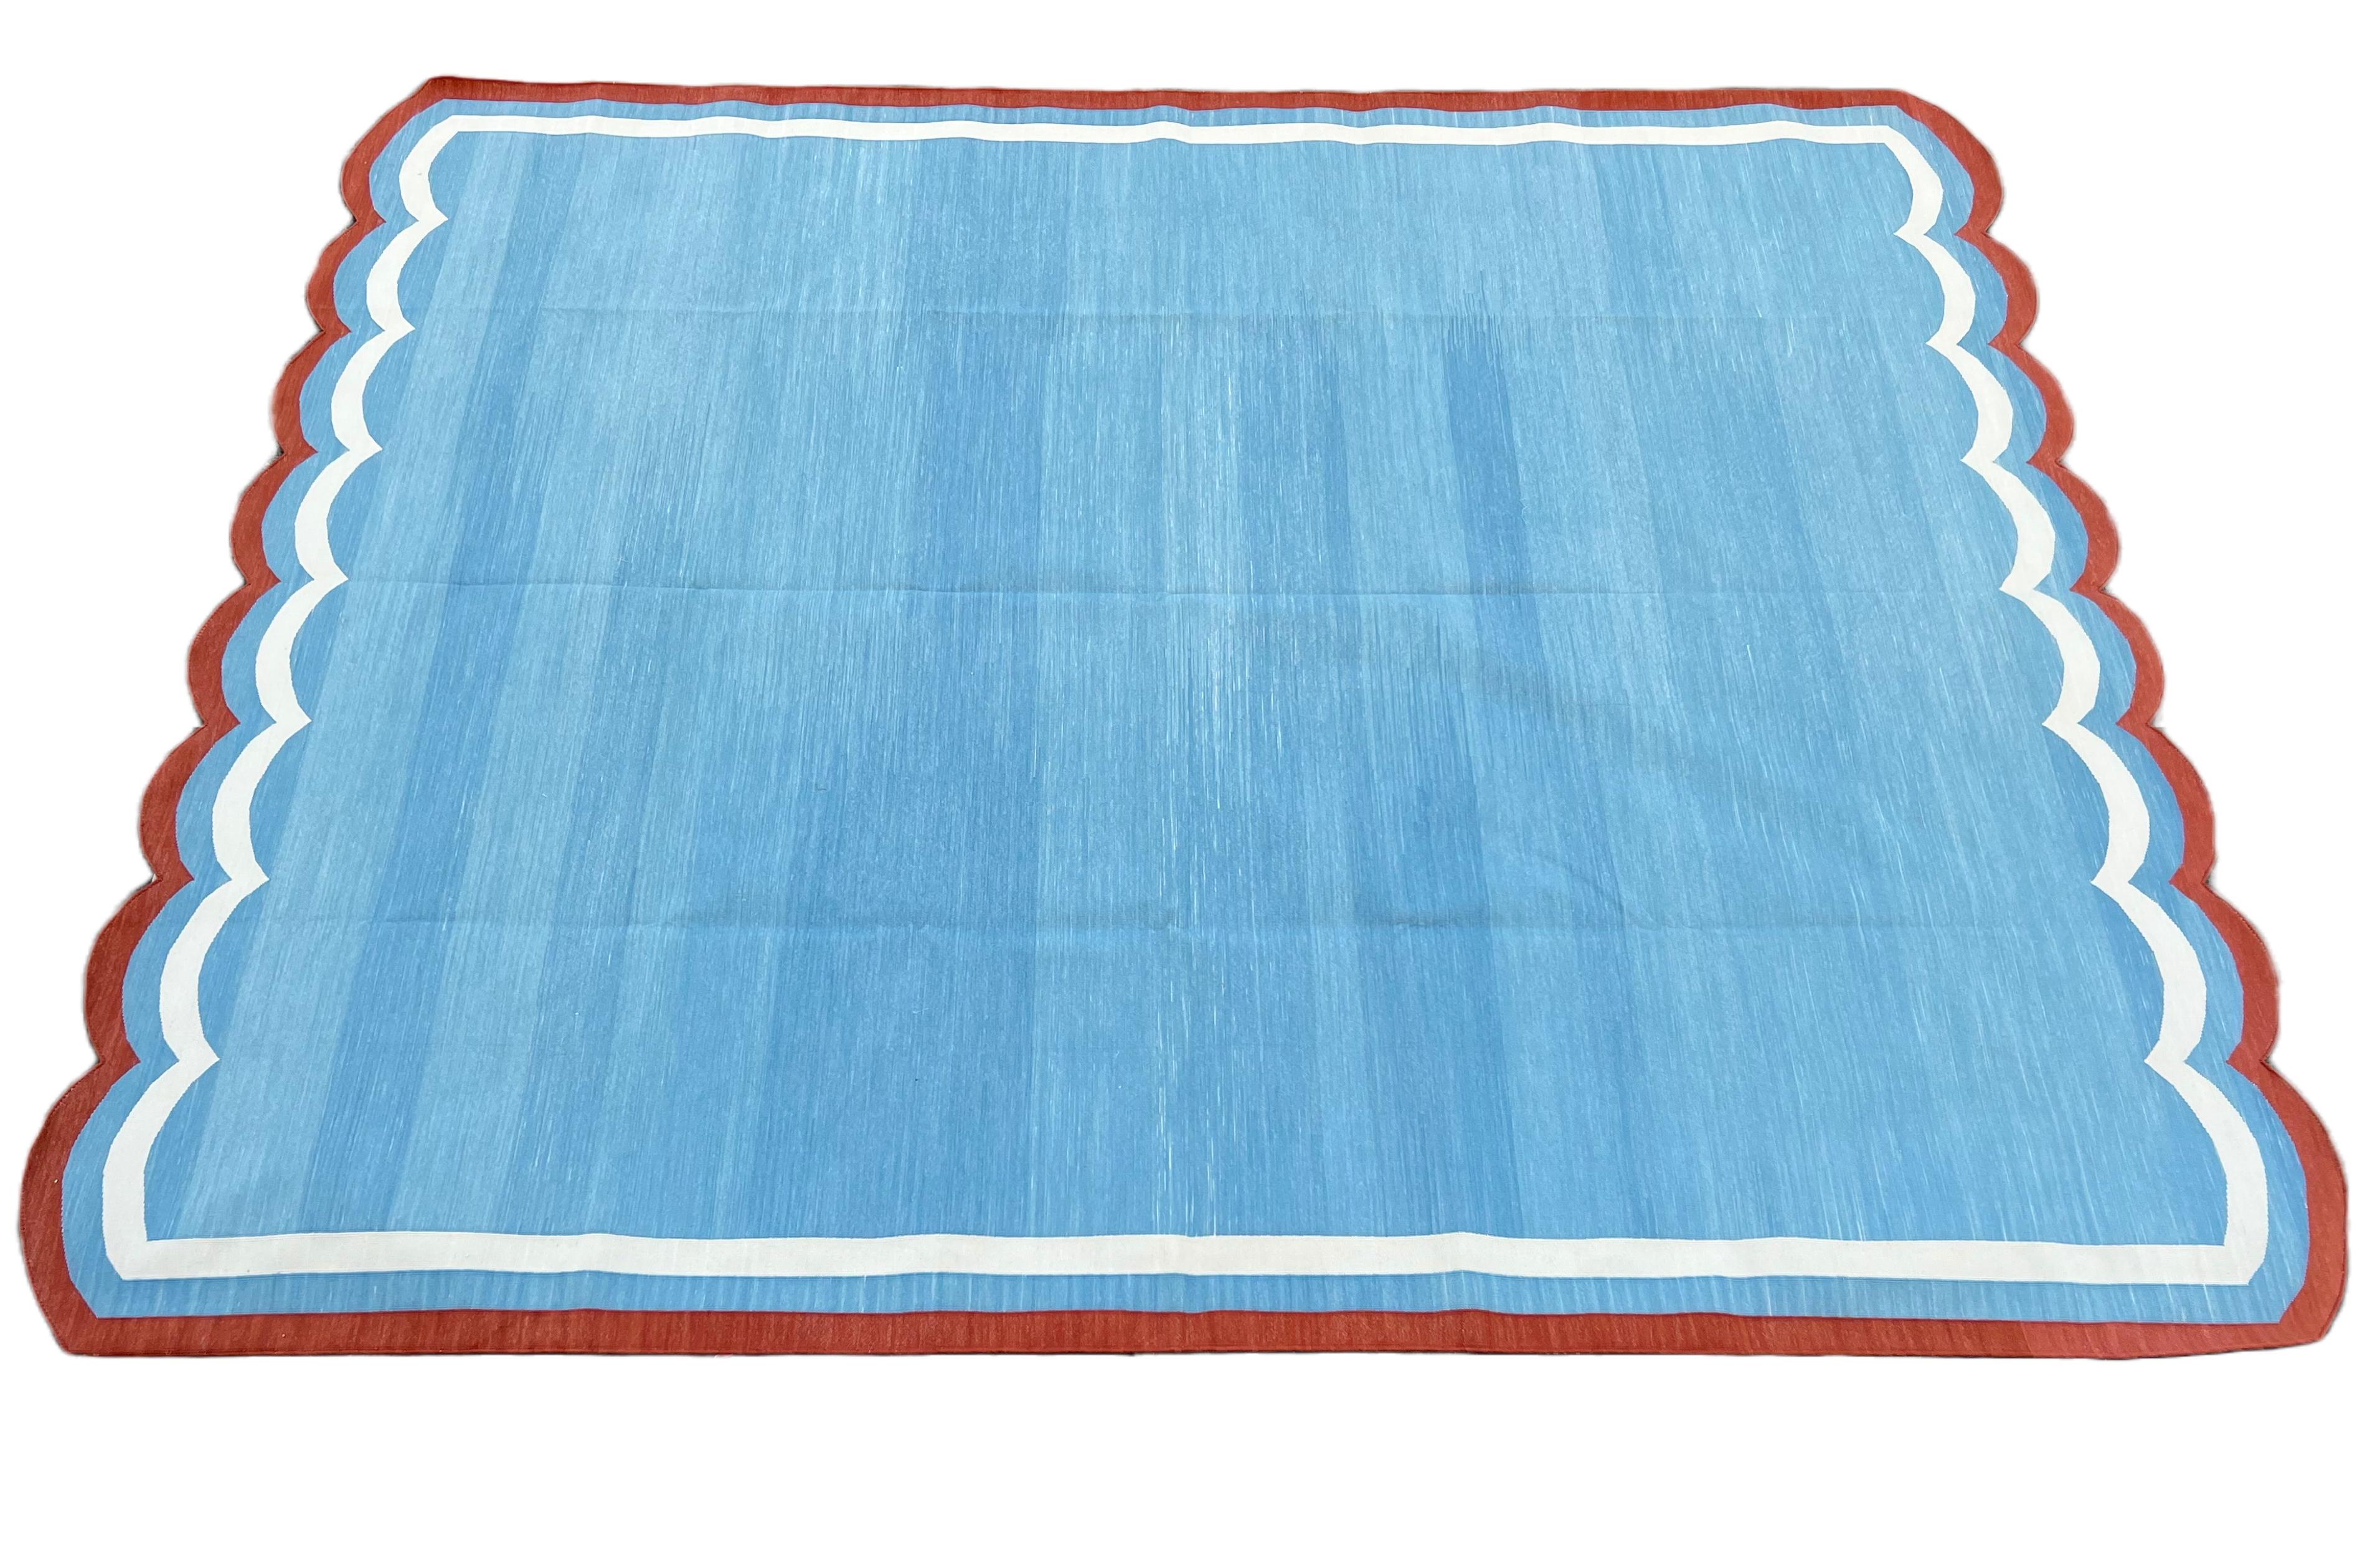 Handmade Cotton Area Flat Weave Rug, 8x10 Blue And Red Scalloped Indian Dhurrie For Sale 2